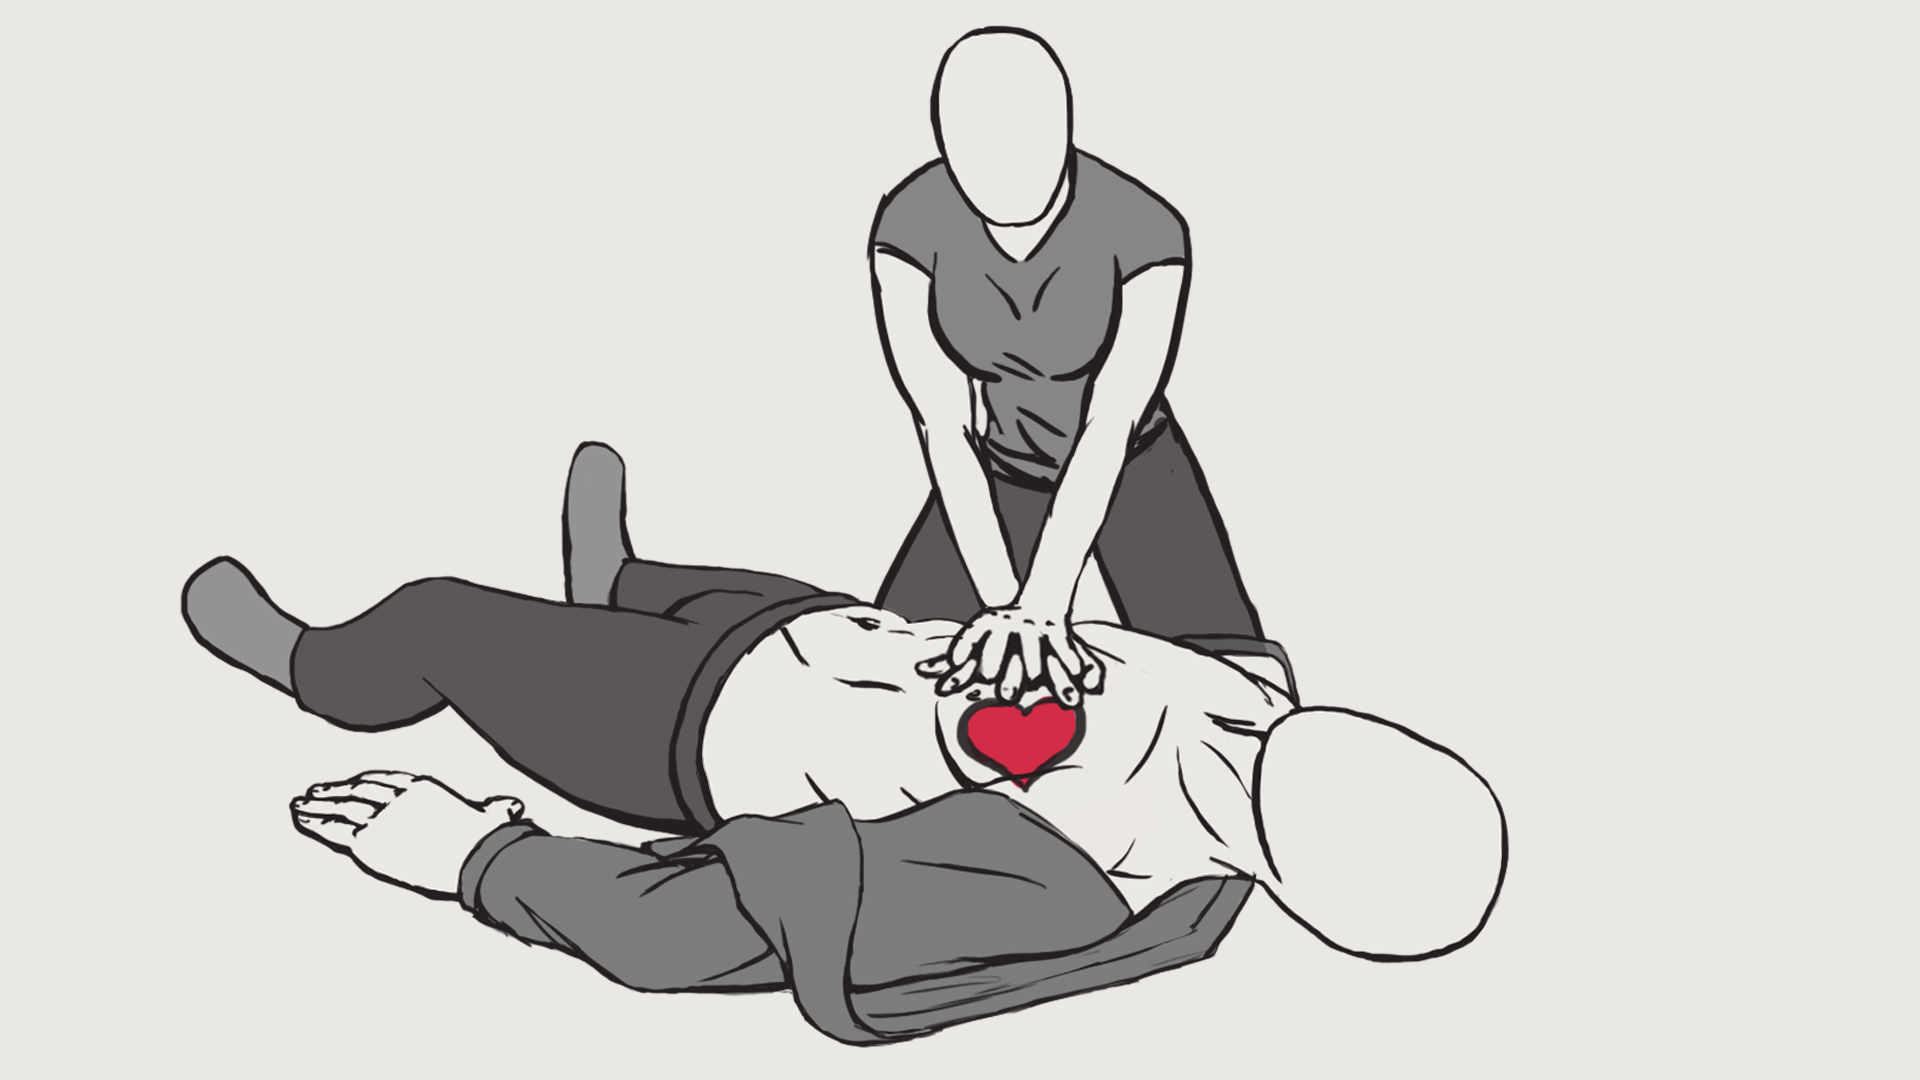 Illustration of a person giving CPR